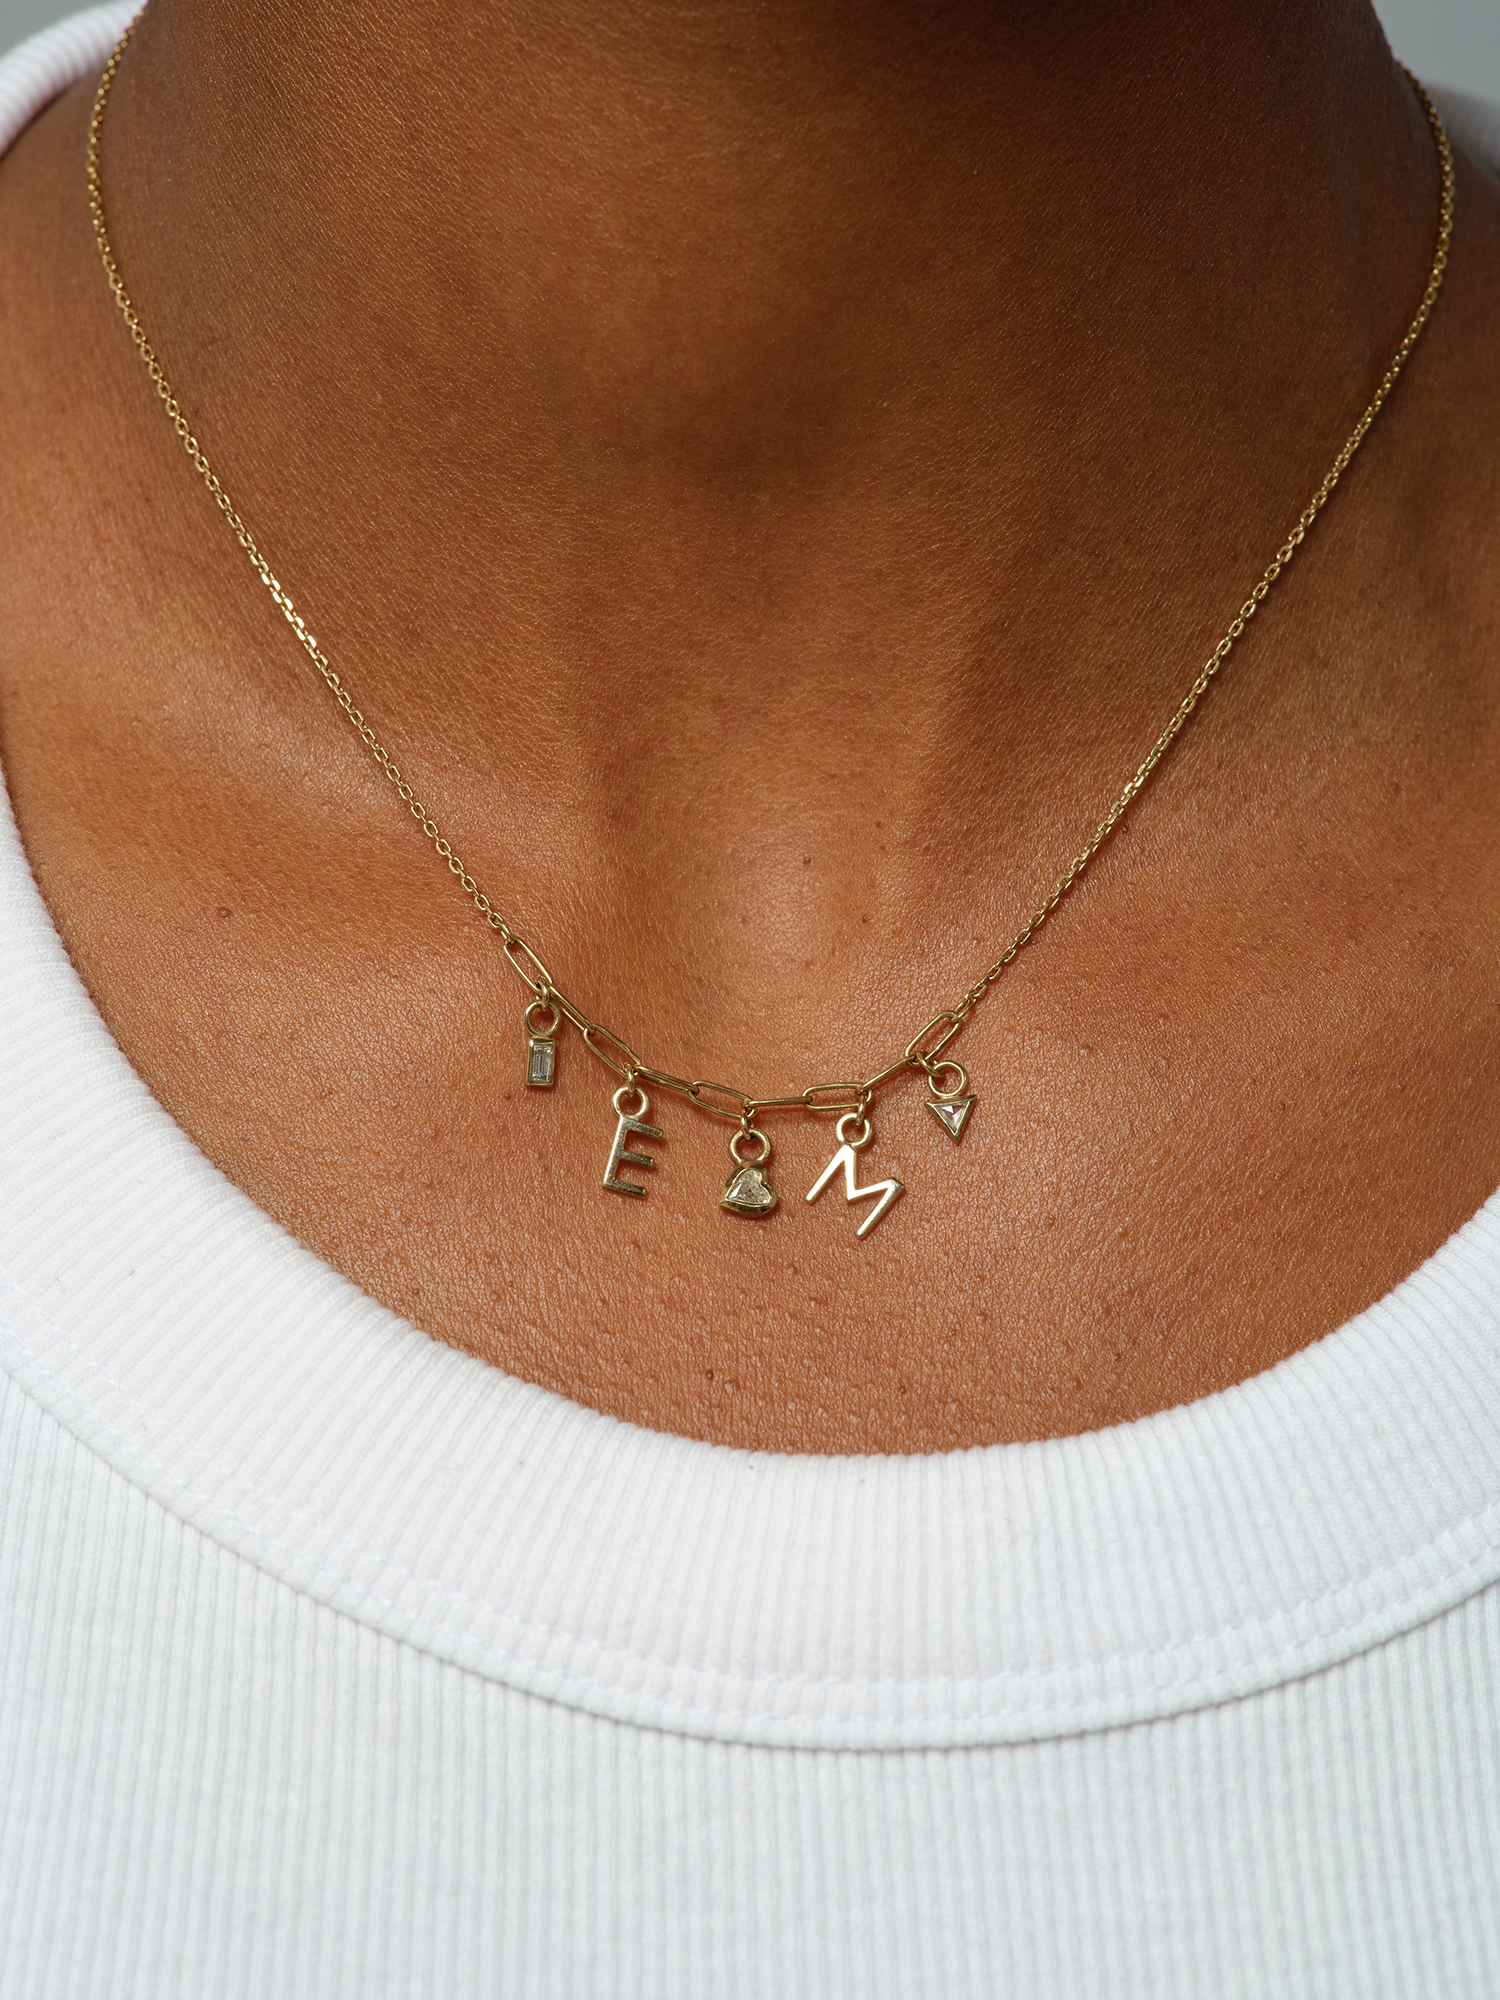 Metier by tomfoolery personalised diamond necklace on model